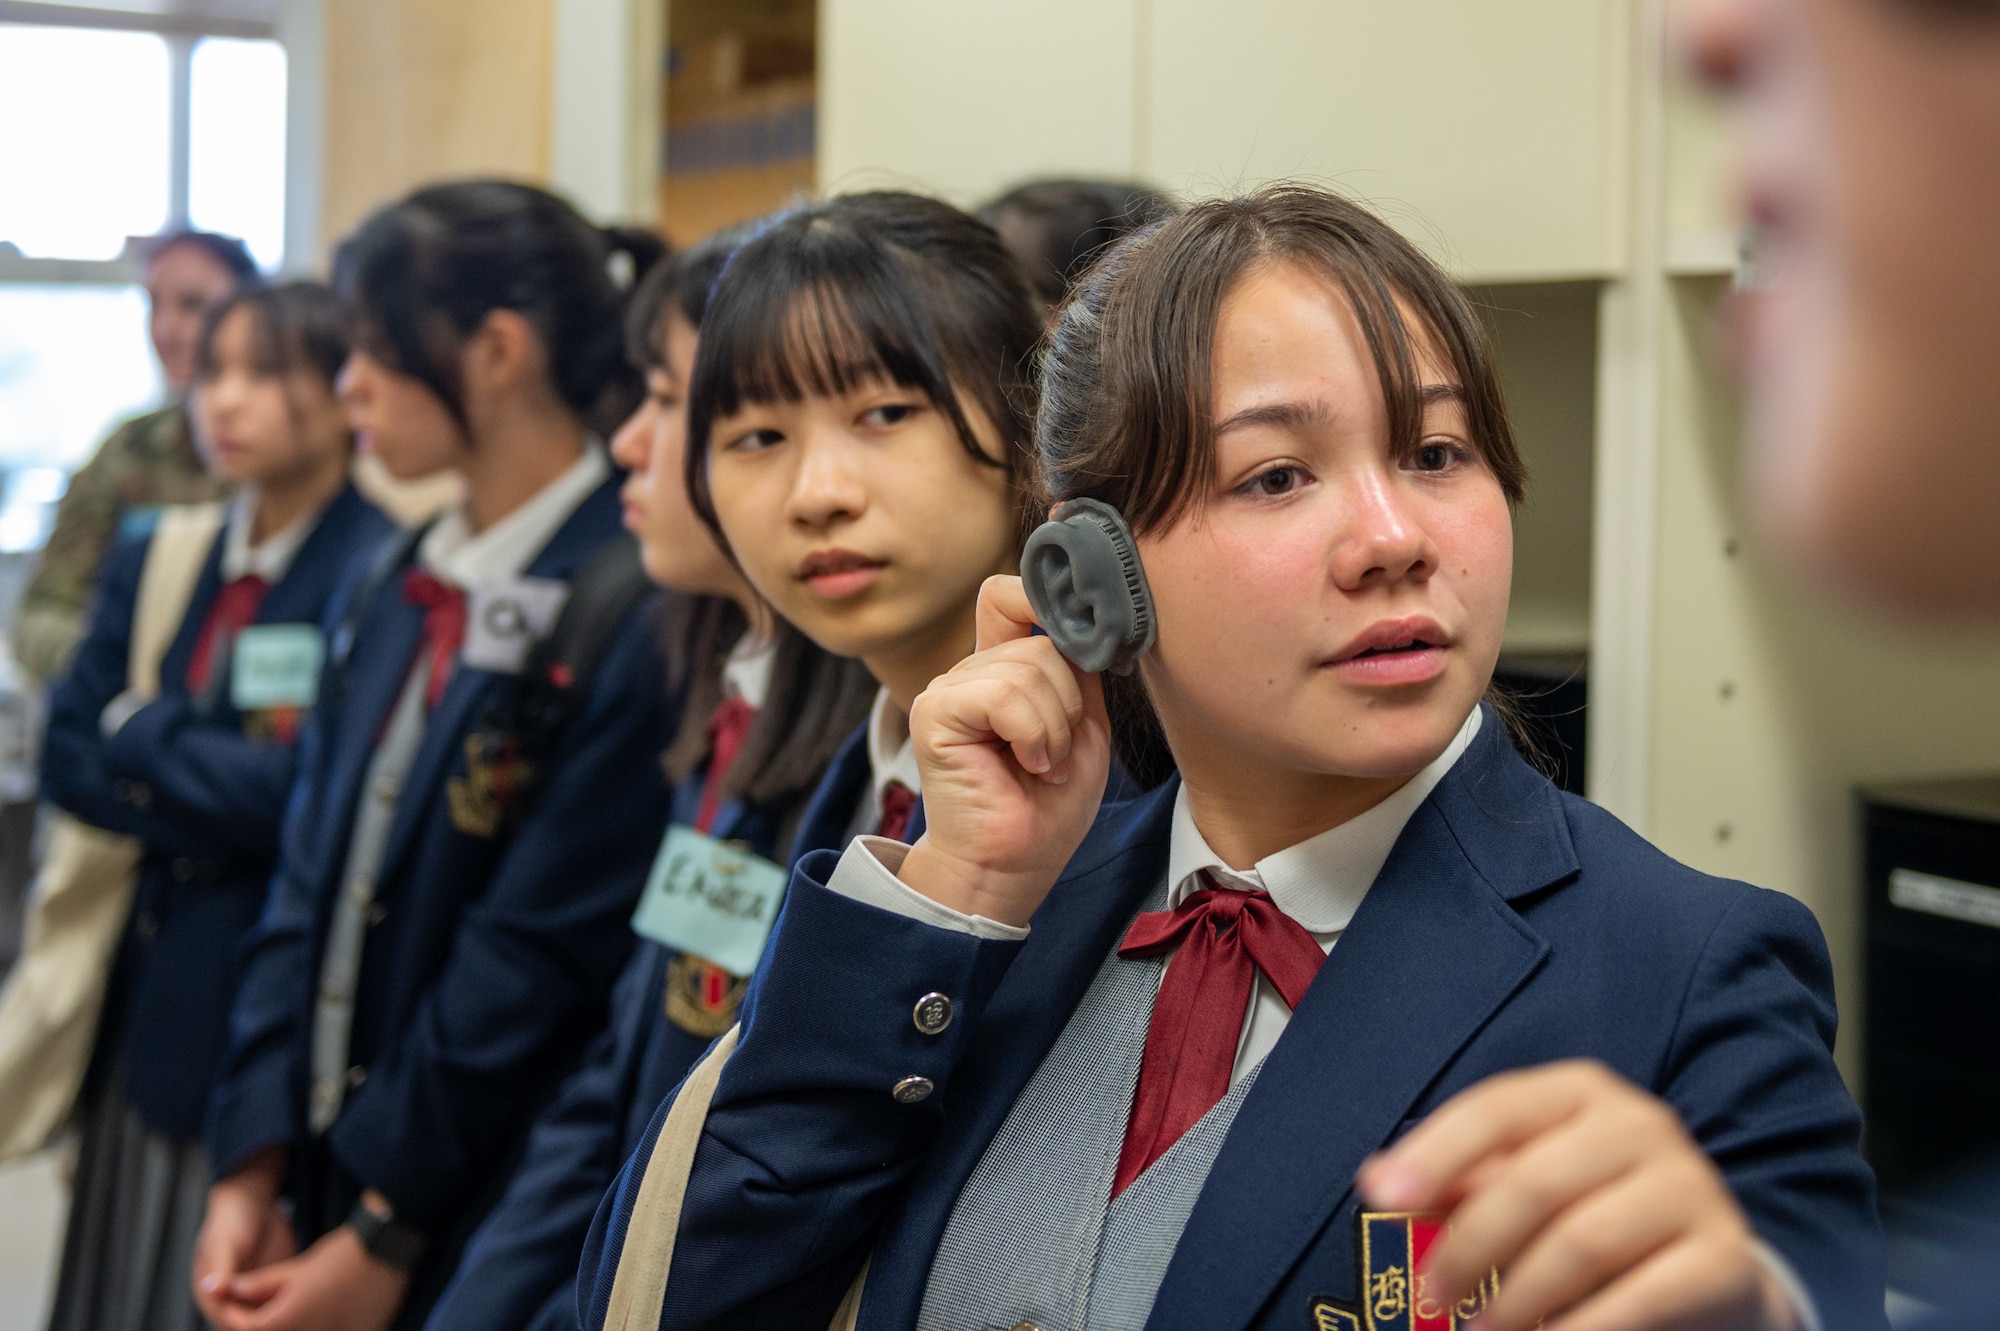 An Okinawan student holds up a 3D printed ear